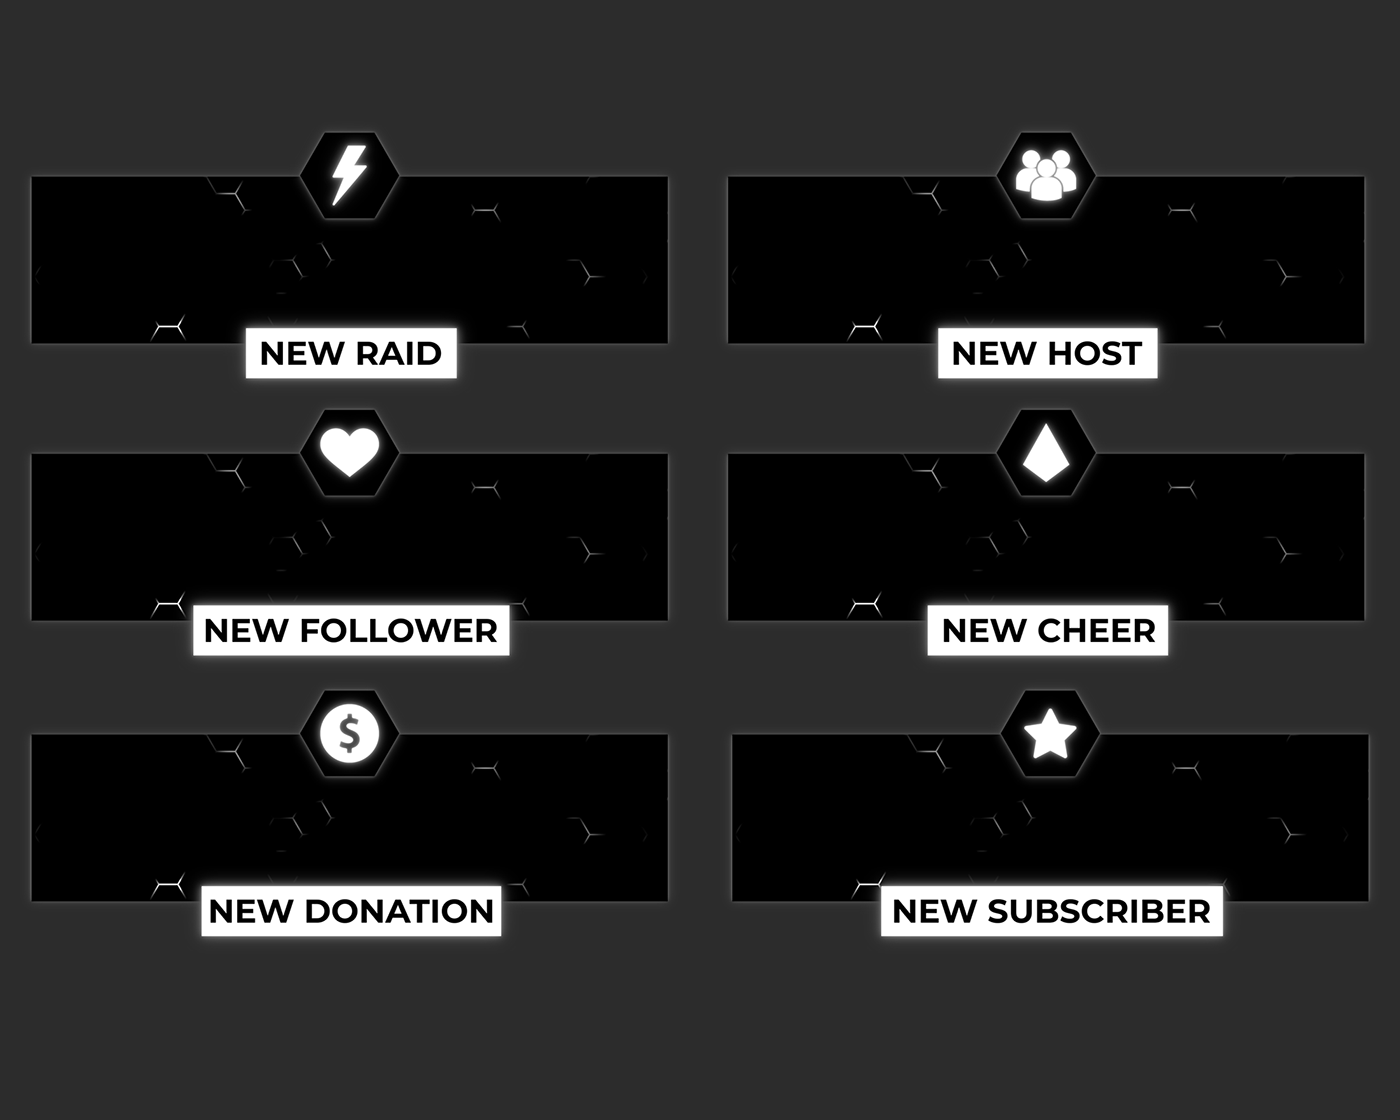 Free alert designs for gaming streams from the sleek black and white Twitch overlay 